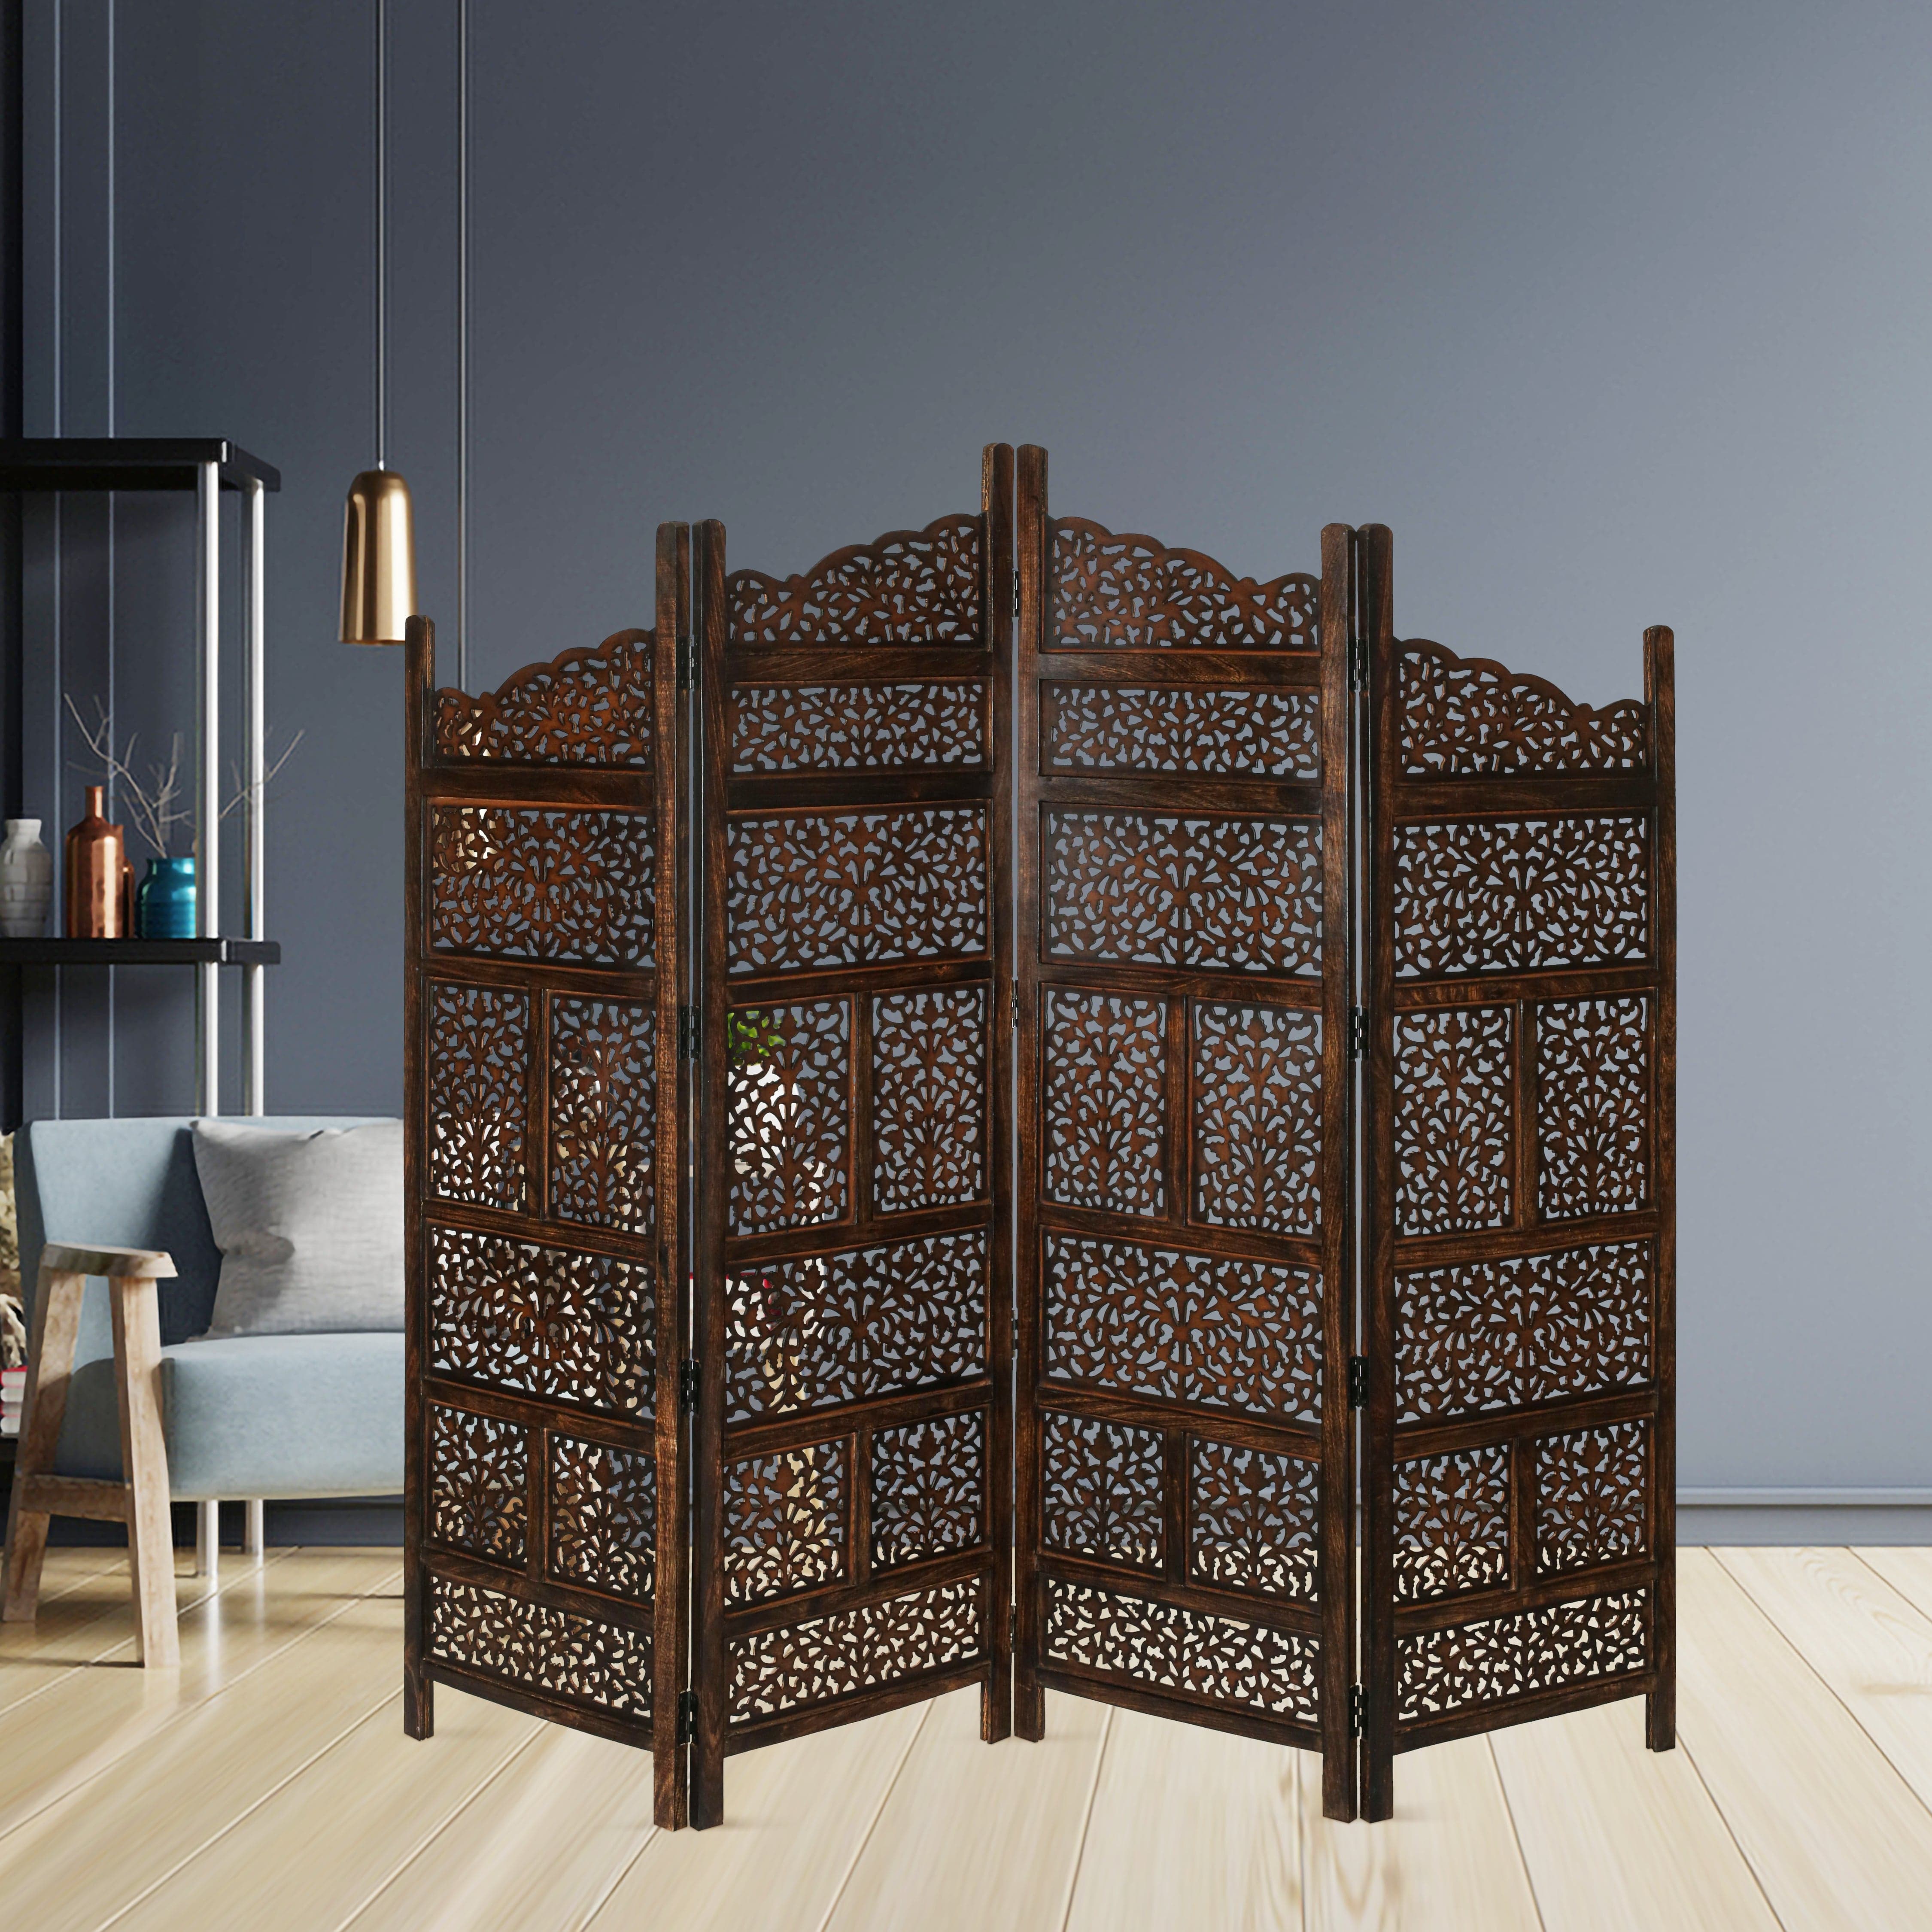 Stylish Burnt Wood Room Divider: Privacy Screen with Shoji Design